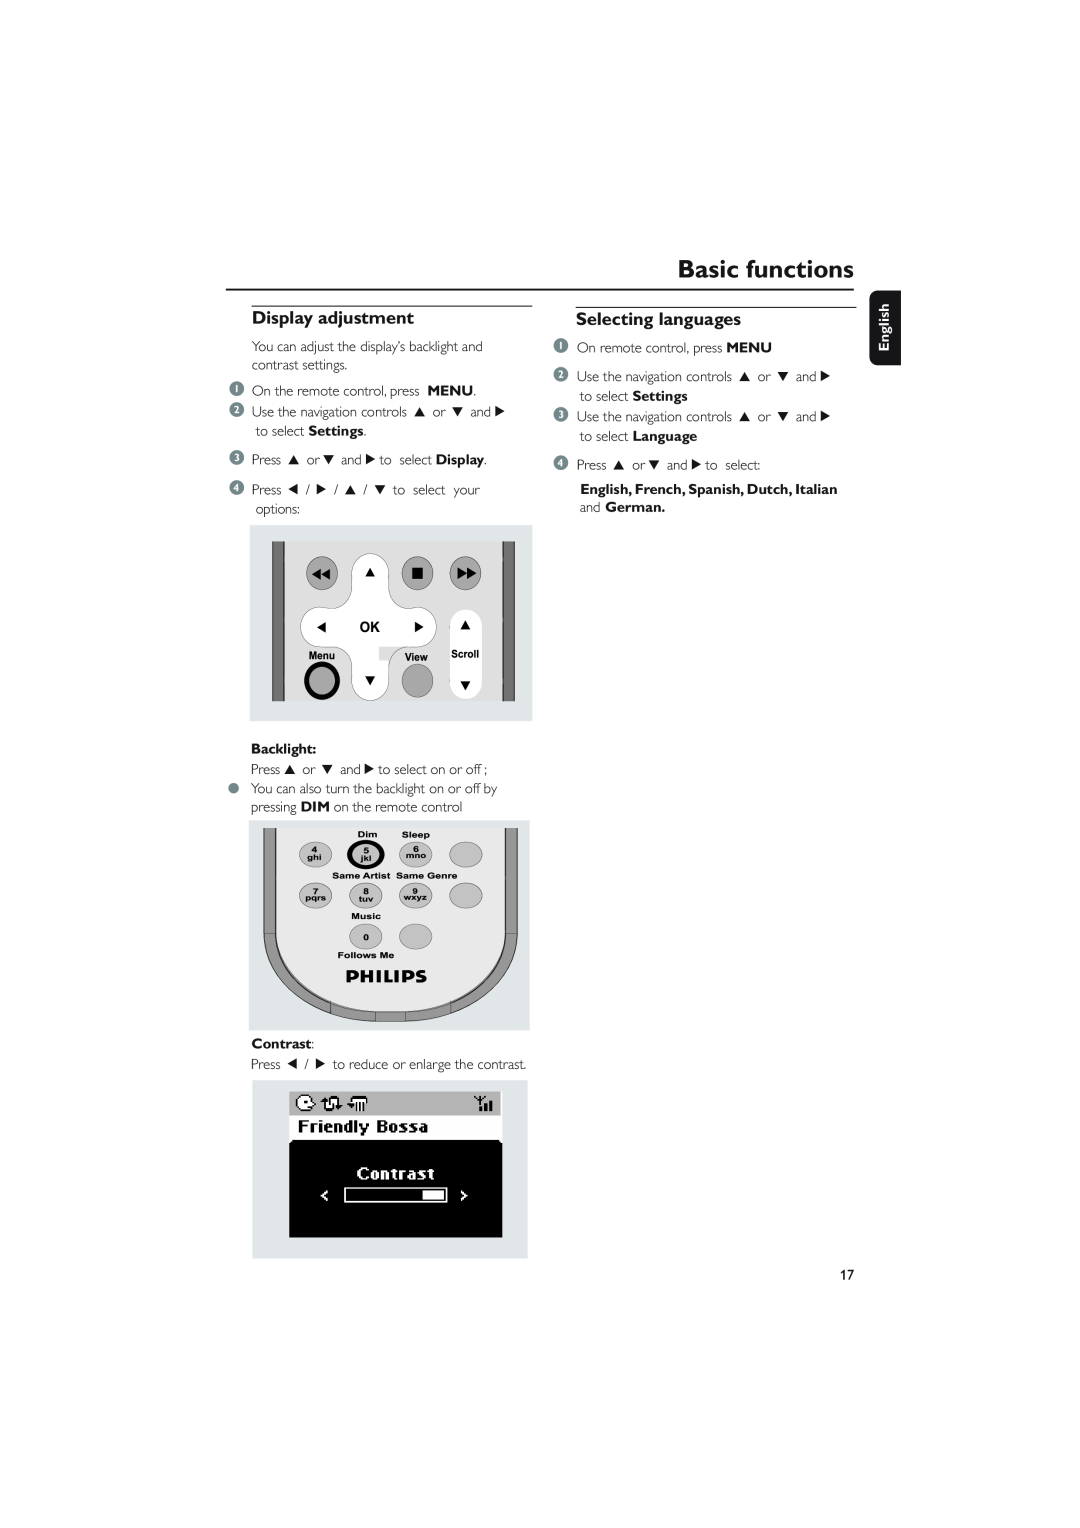 Philips WAS5 user manual Display adjustment, Selecting languages, Basic functions, English, Backlight, Contrast 